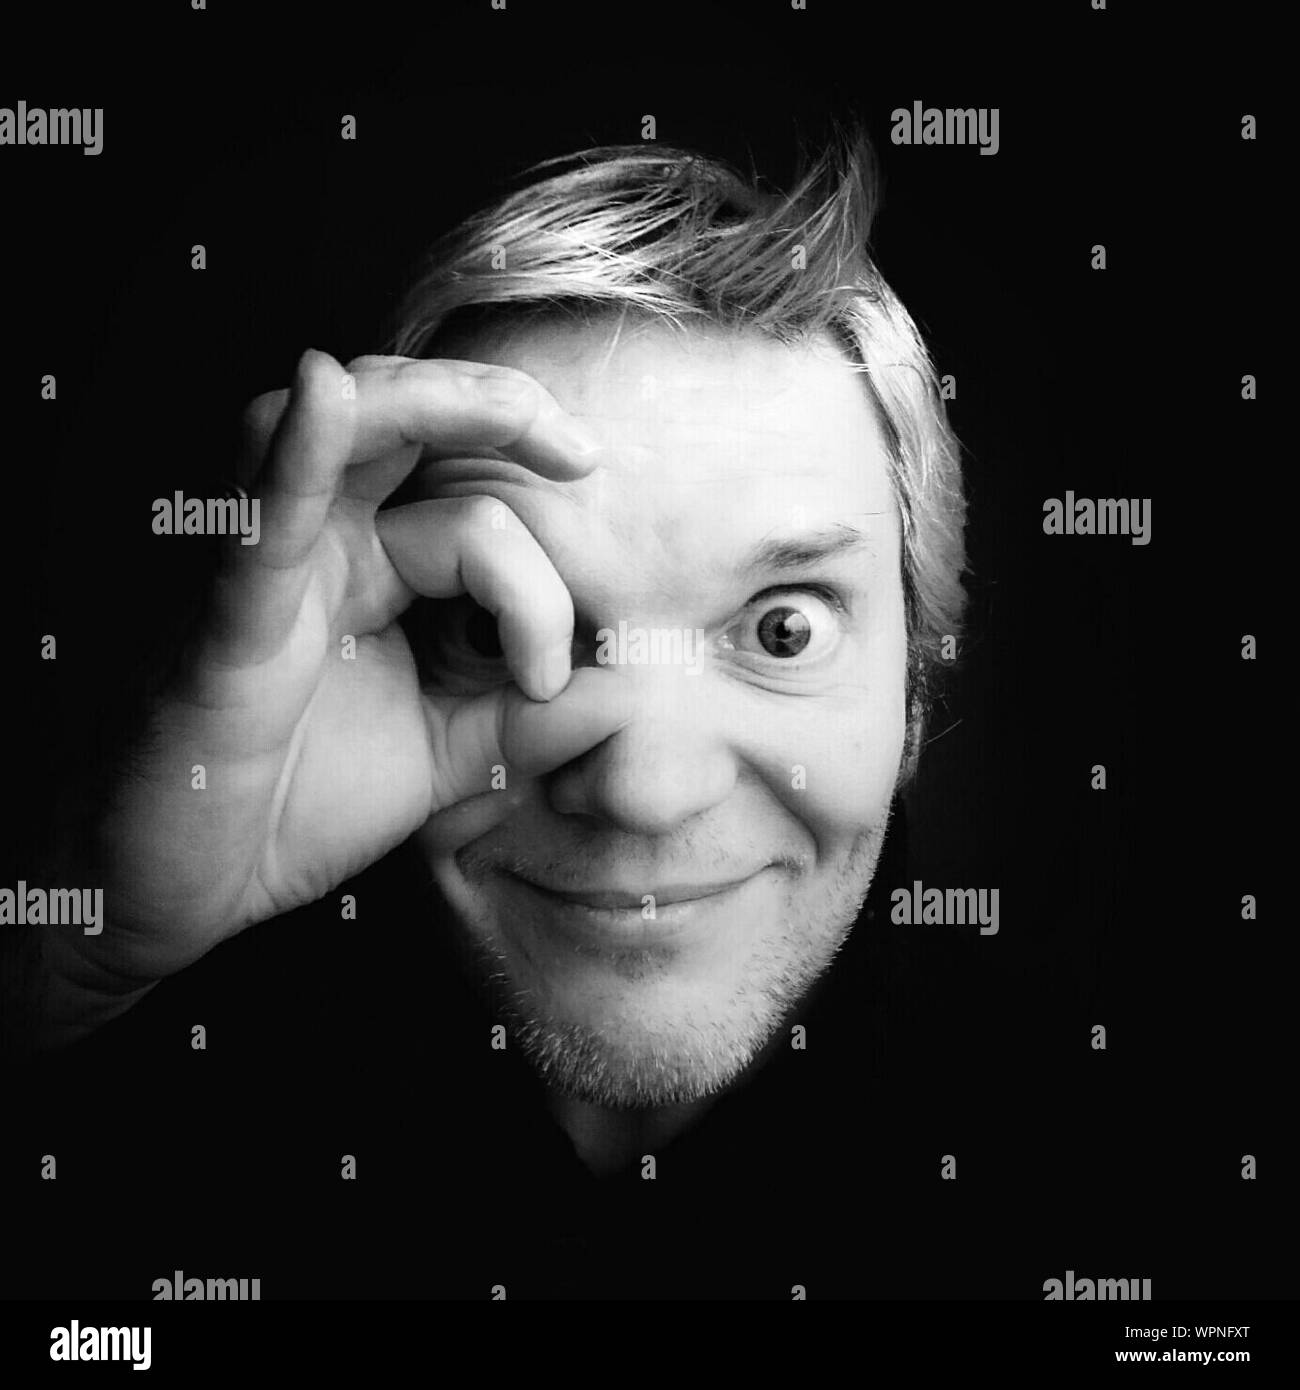 Portrait Of Man Circling Eye With Fingers Against Black Background Stock Photo